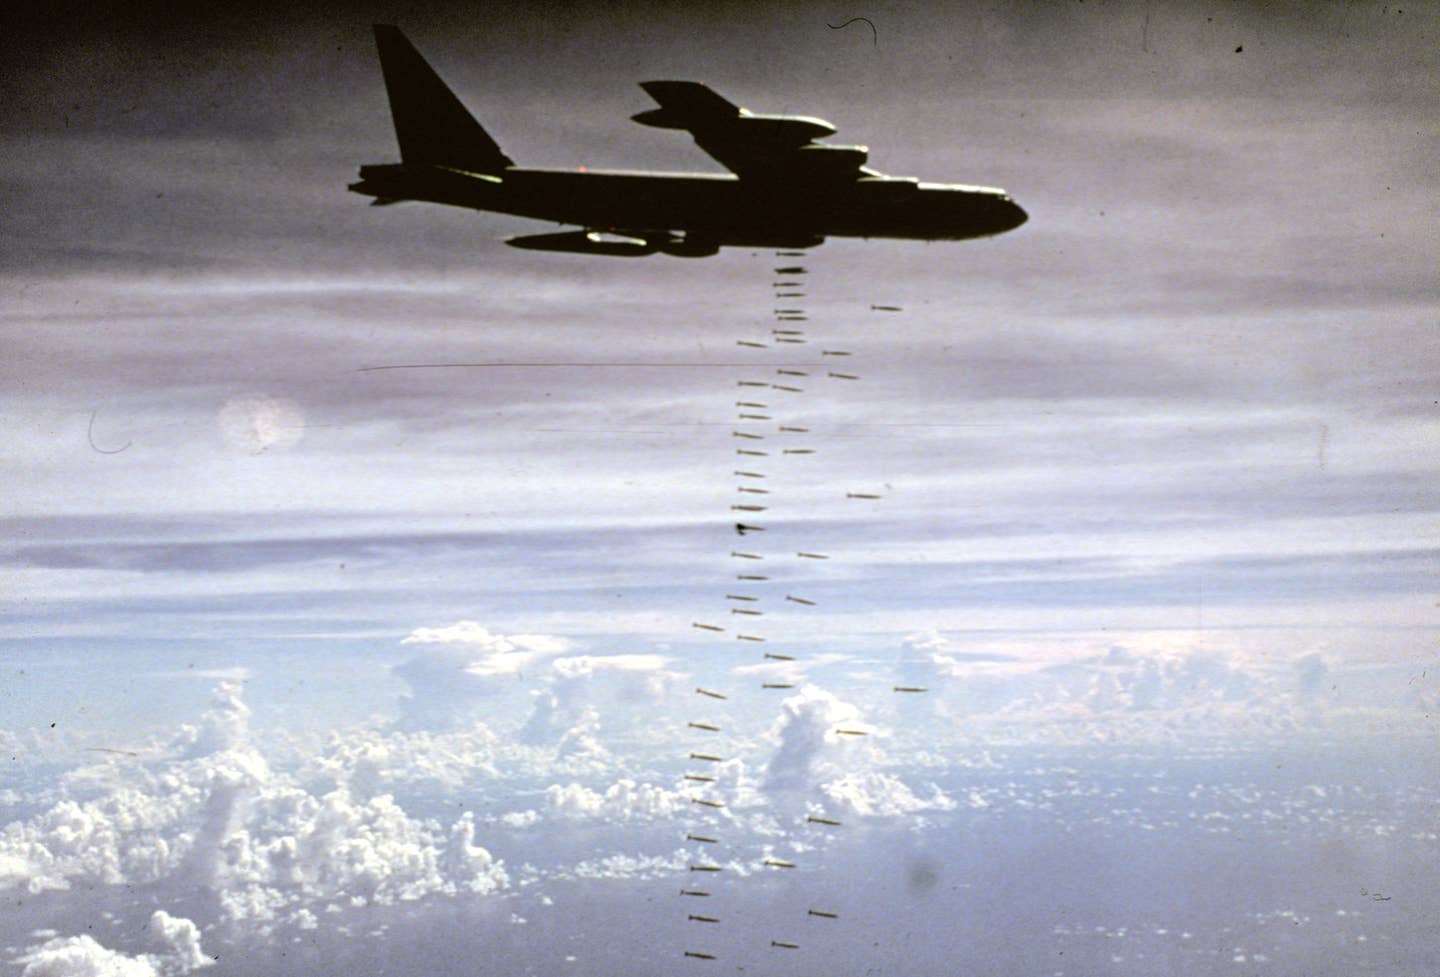 U.S. Air Force B-52 Stratofortress heavy bombers strike Viet Cong and North Vietnamese targets during operation Arc Light.